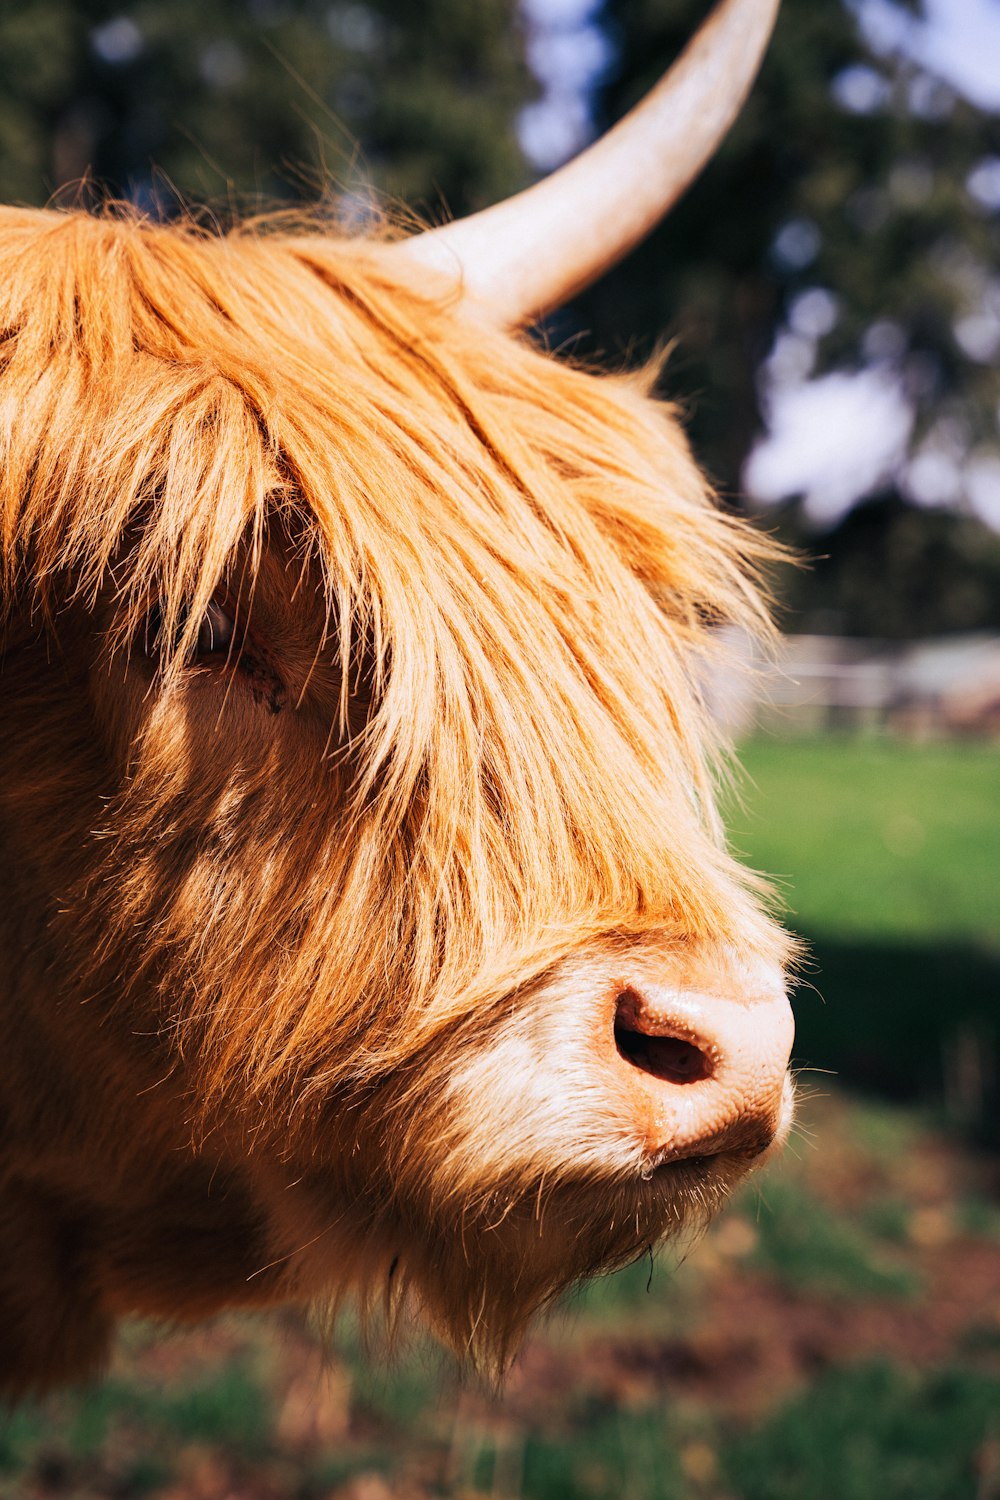 a close up of a cow with long hair